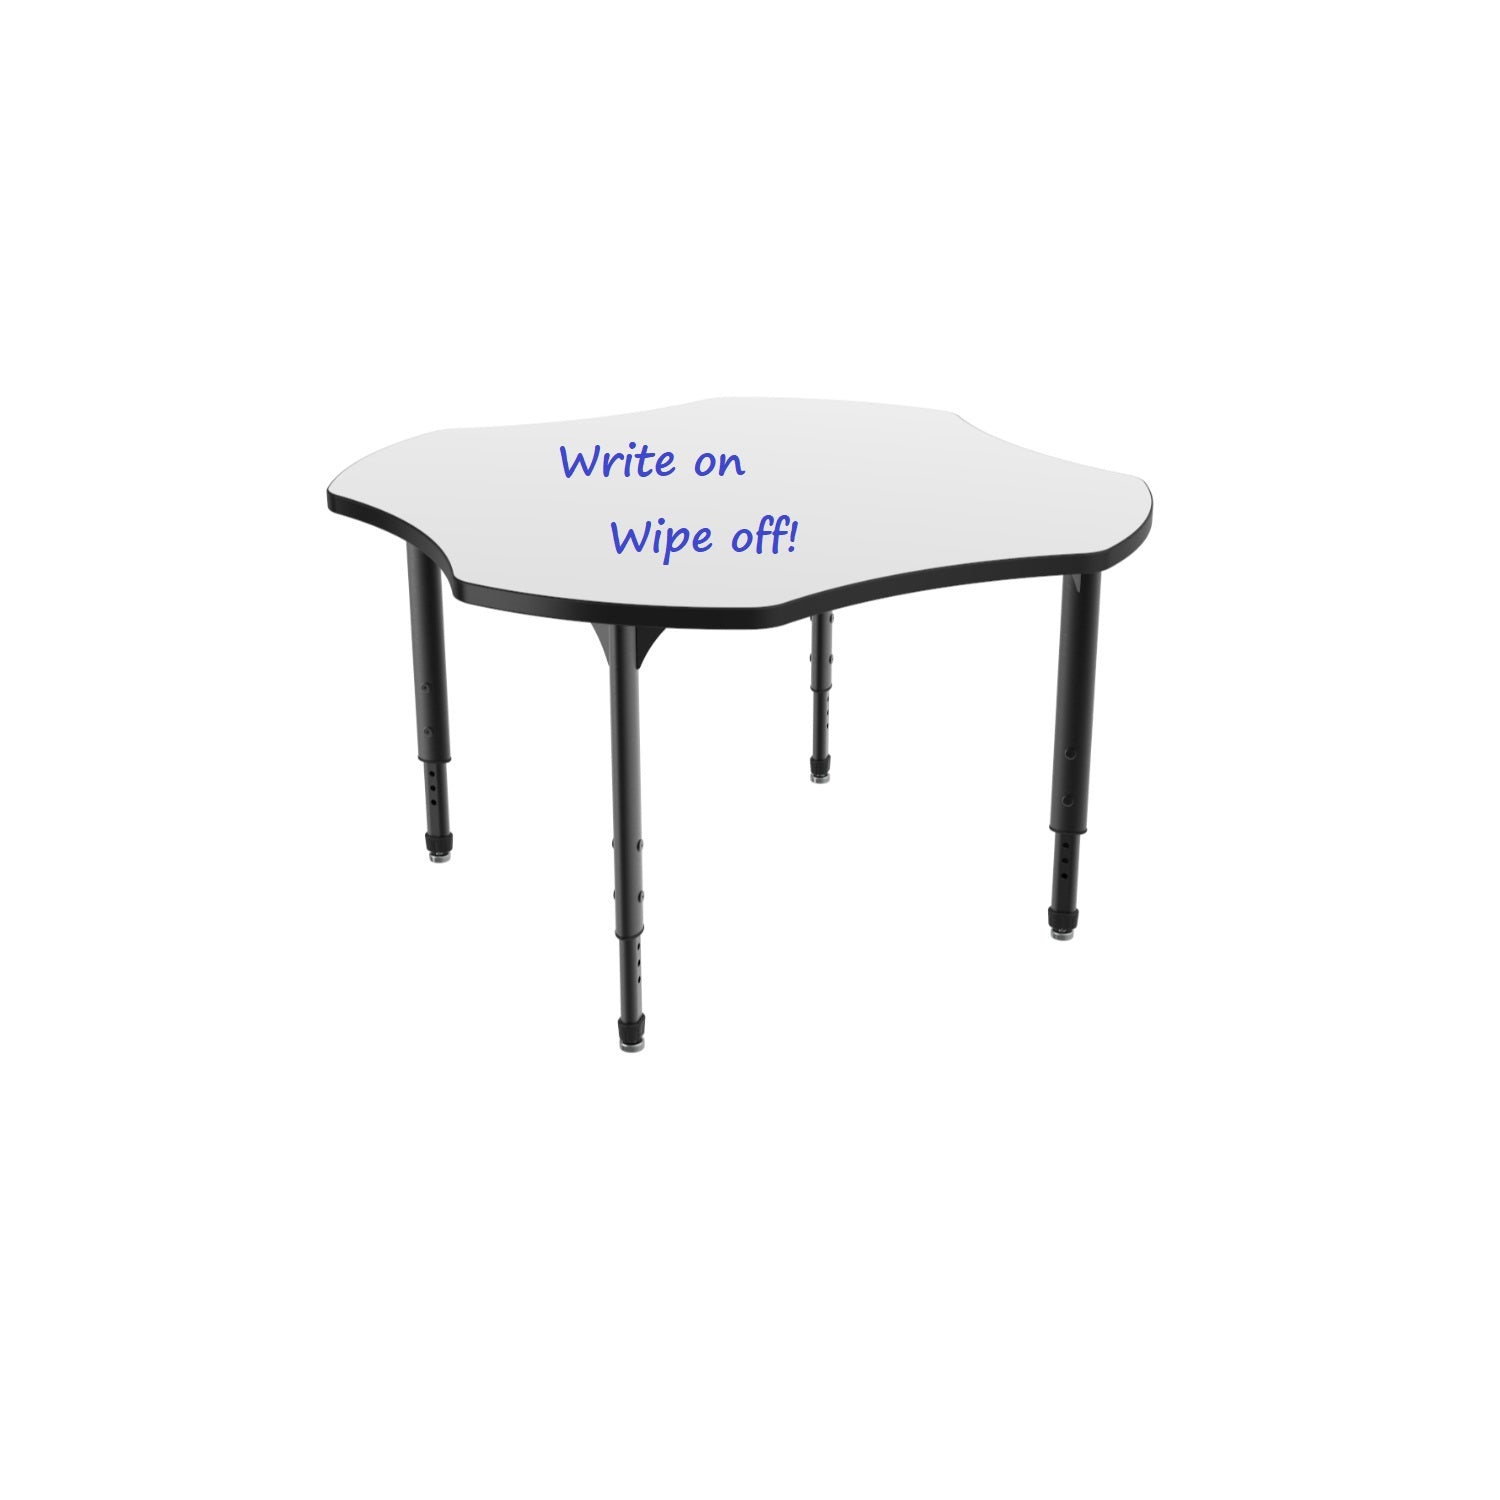 Apex Adjustable Height Collaborative Student Table with White Dry Erase Markerboard Top, 48" Clover